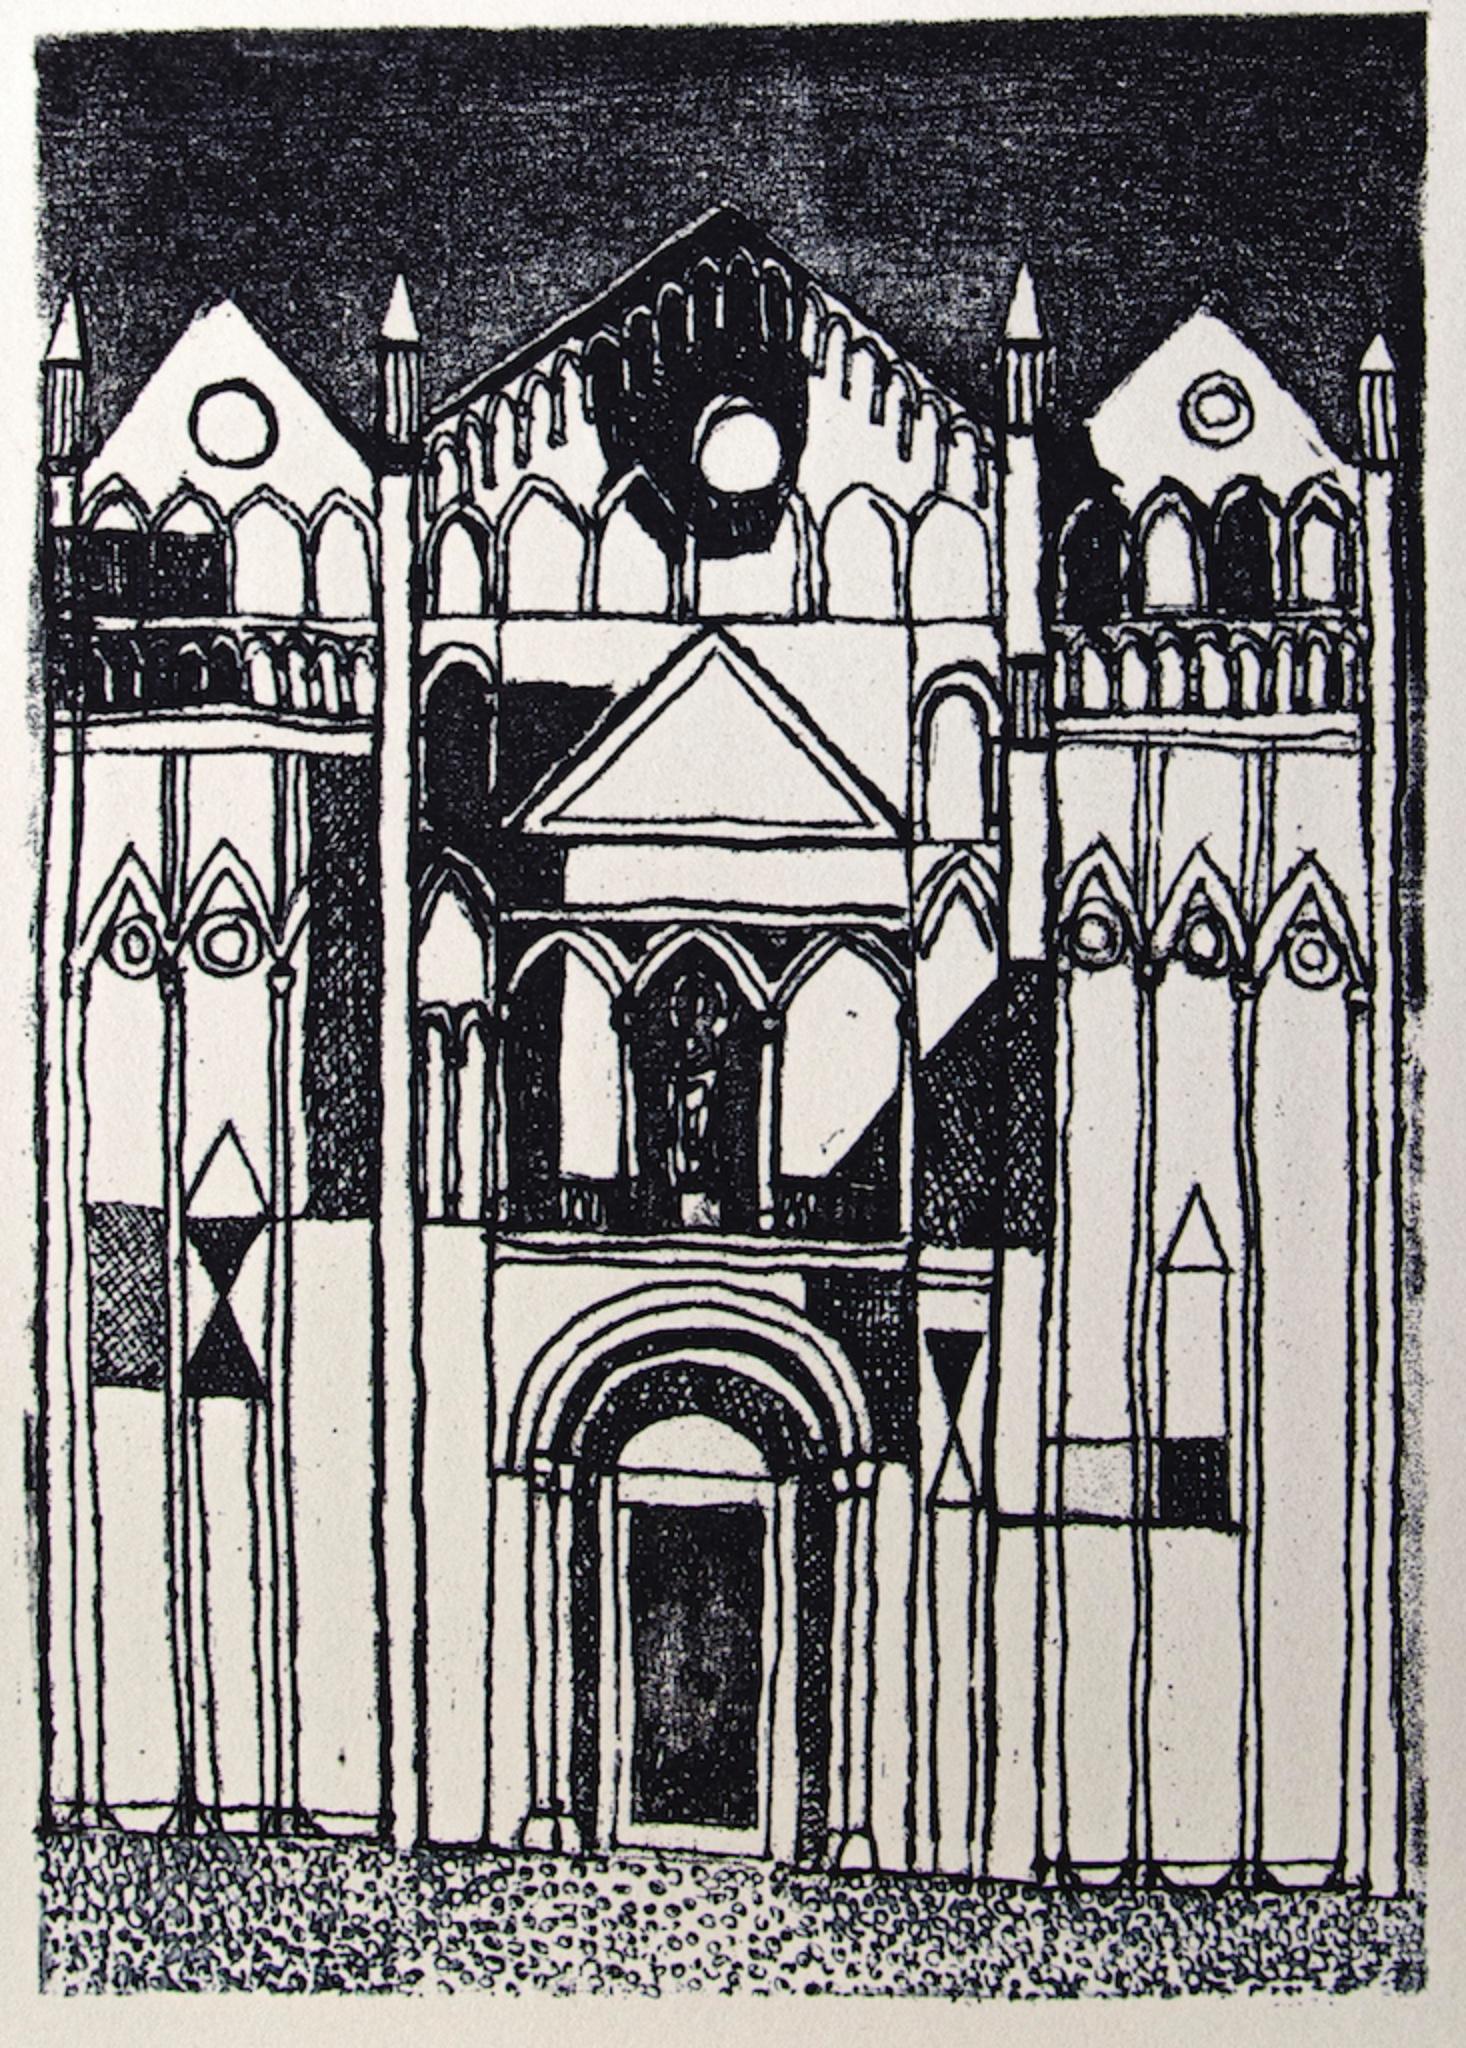 The Cathedral is an original Vintage Offset Print on ivory-colored paper, realized by Franco Gentilini (Italian Painter, 1909-1981), in 1970s.

The state of preservation of the artwork is excellent.
Image Dimensions： 24.5 x 17.5 cm

Franco Gentilini